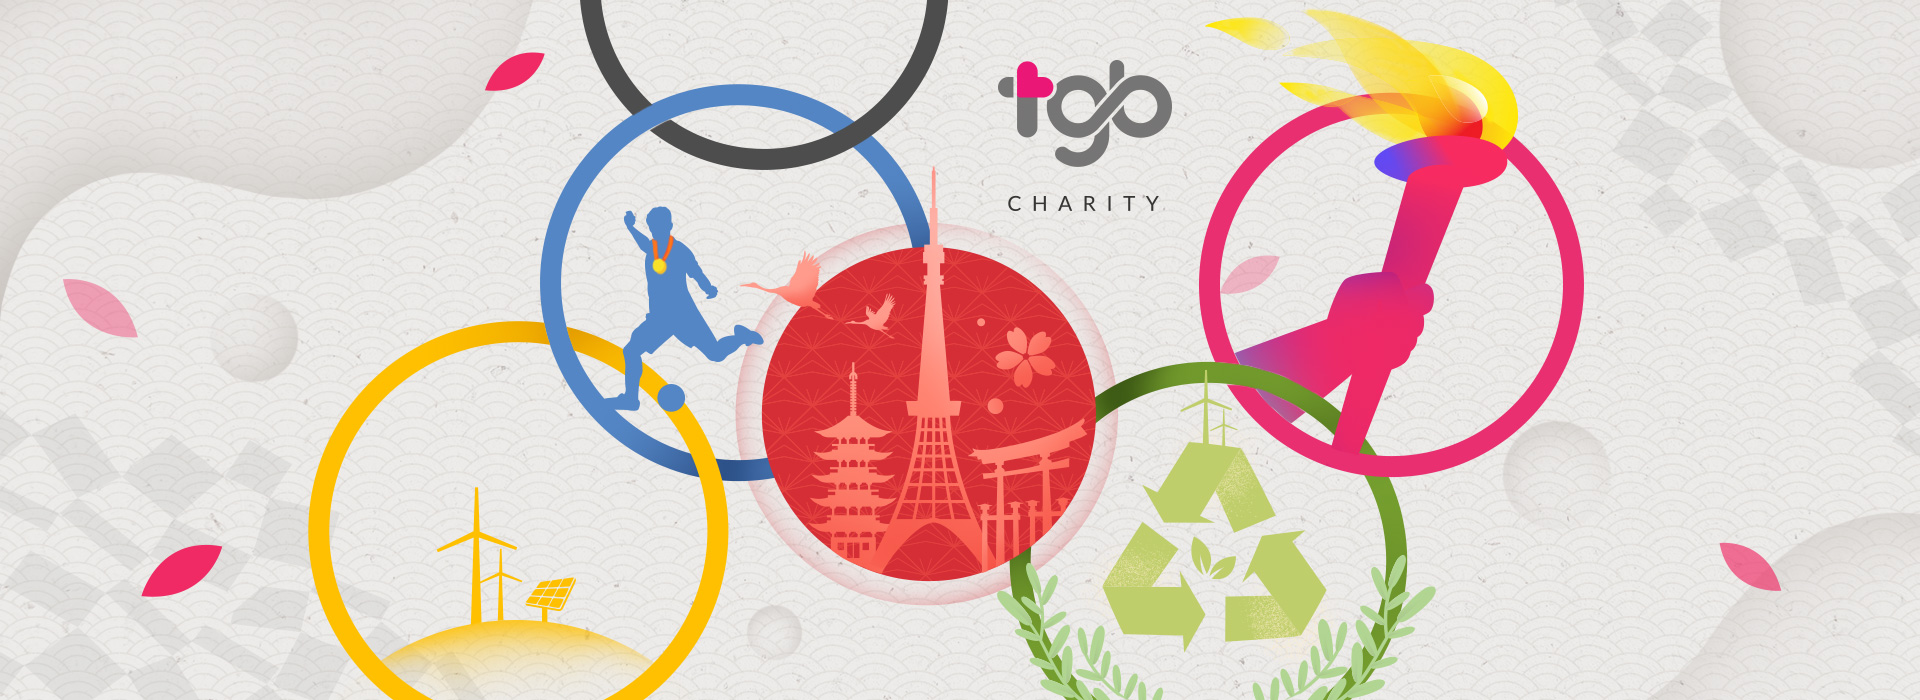 Tokyo 2020: The Greenest Olympic Games Ever - TGB Charity